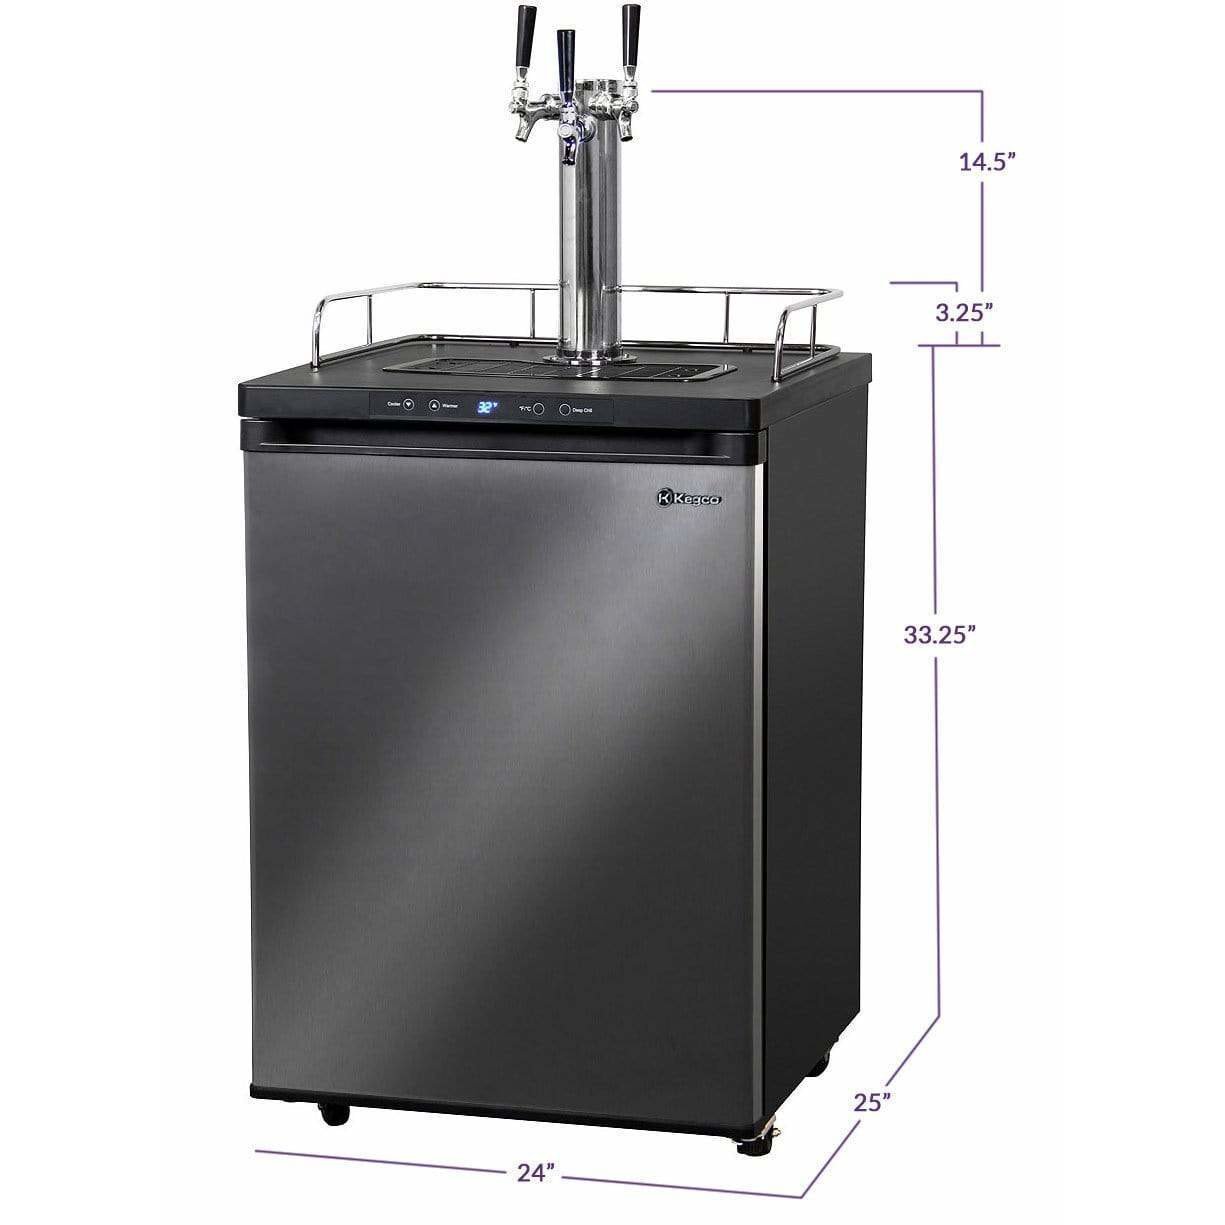 Kegco 24" Wide Triple Tap Black Stainless Steel Home Brew Kegerator HBK309X-3 Wine Coolers Empire